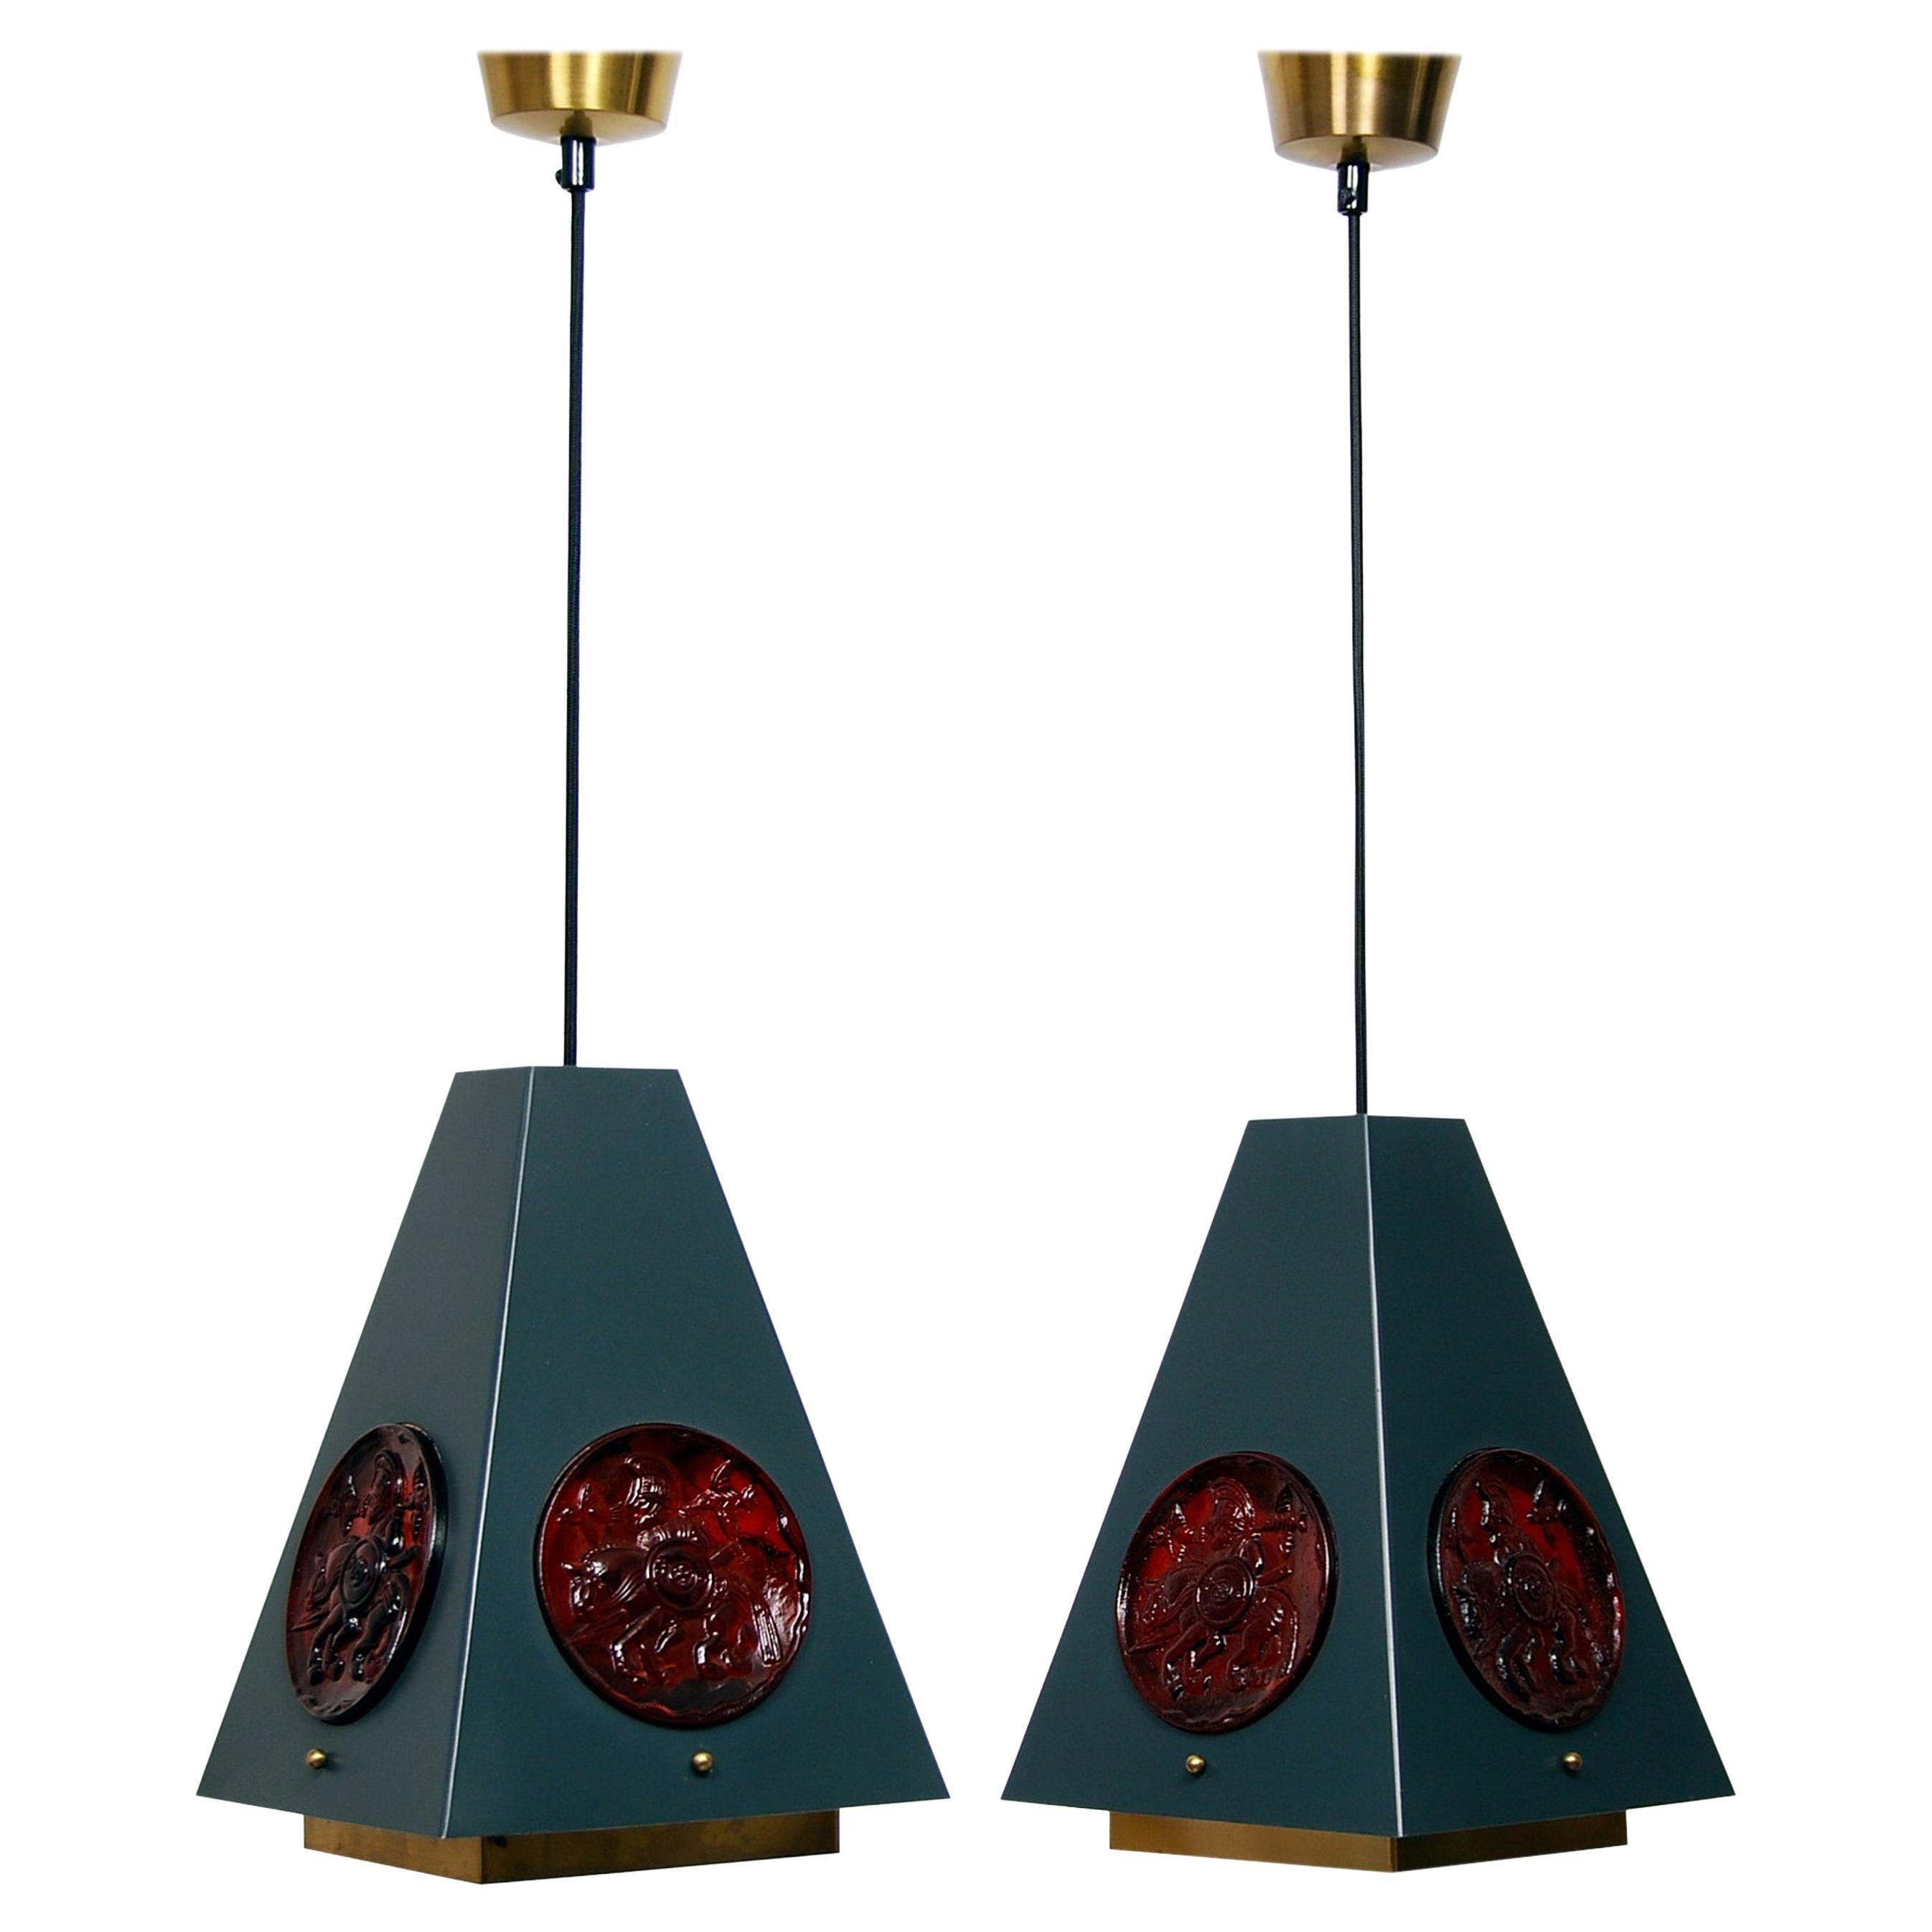 High quality ceiling lights in brass, lacquered metal and glass. Simple cubist shapes and superb color matching give these lamps something extra. The lamp parts are made by Einar Bäckström and the glass parts is designed by Erik Höglund. The brass